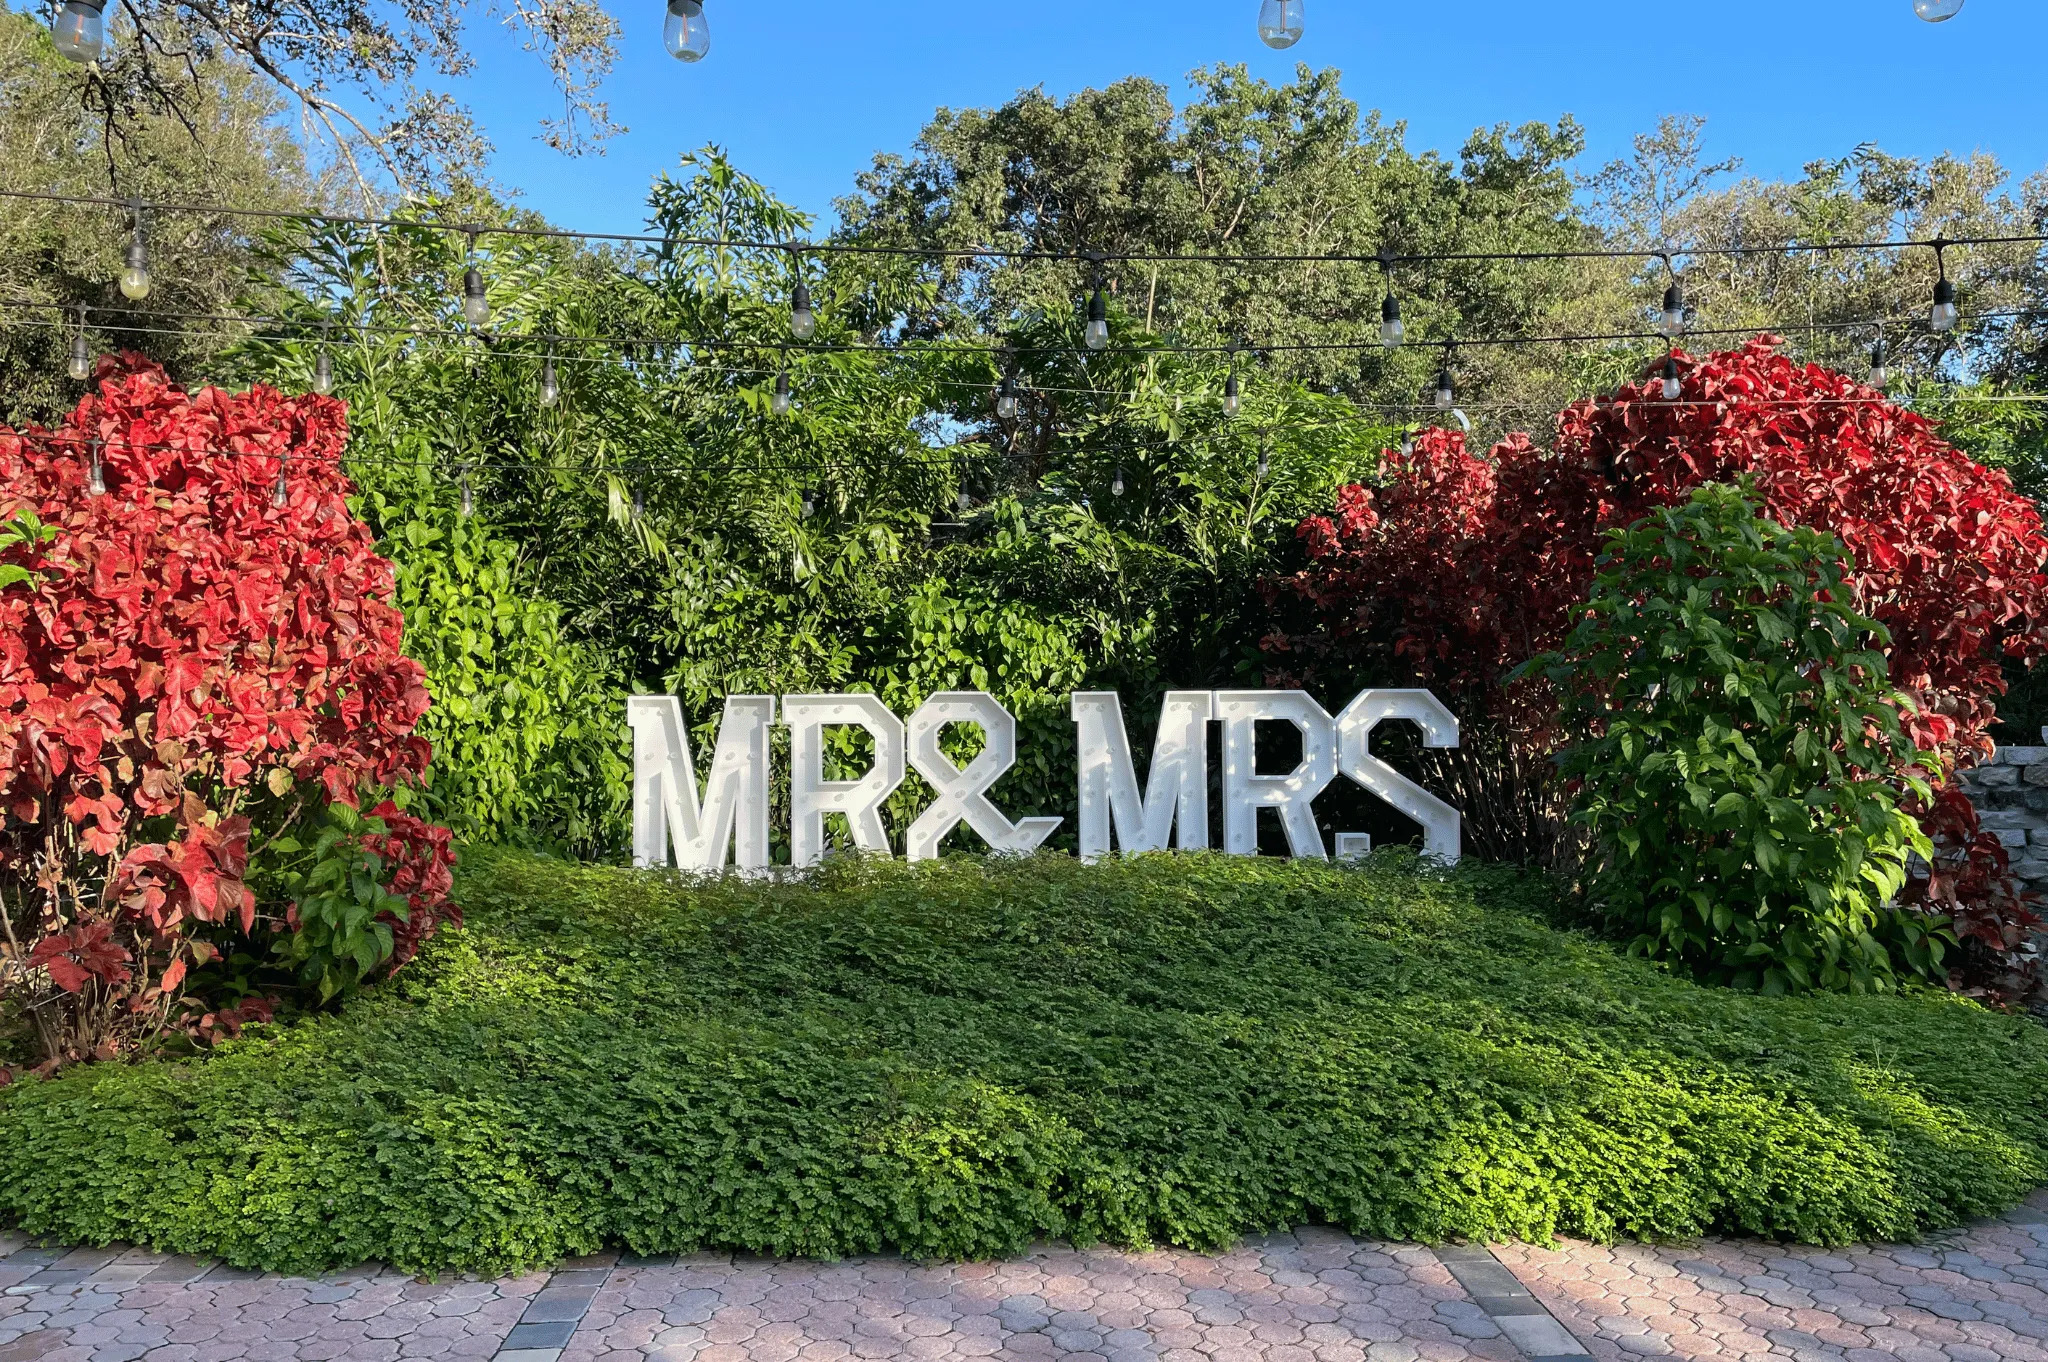 Photo of a sign that says Mr & Mrs in a garden.